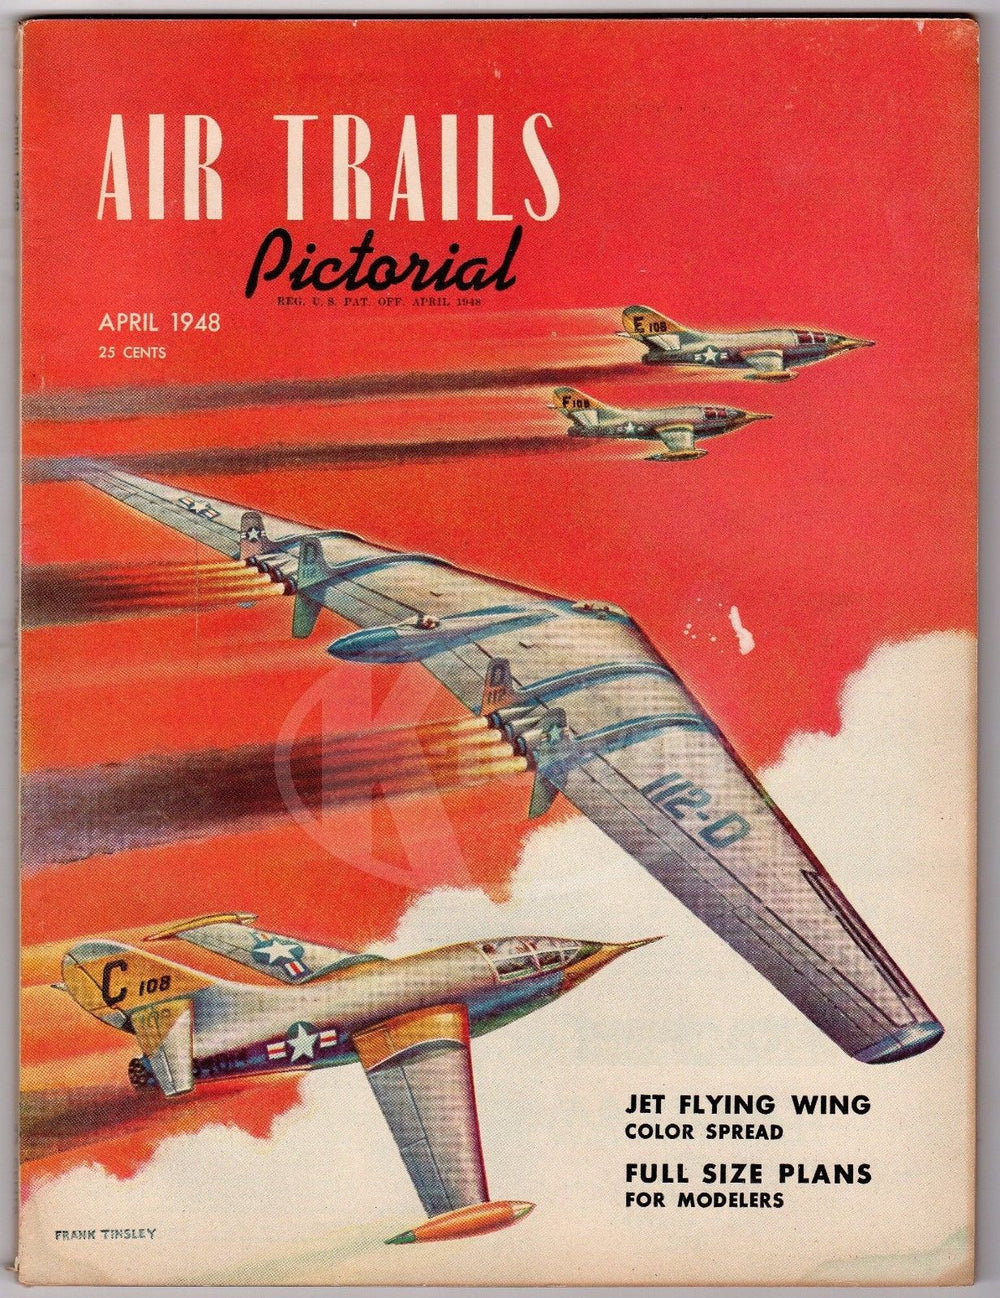 AIR TRAILS ANTIQUE GRAPHIC AVIATION MAGAZINE 112D FLYING WING PLANE POSTER 1948 - K-townConsignments